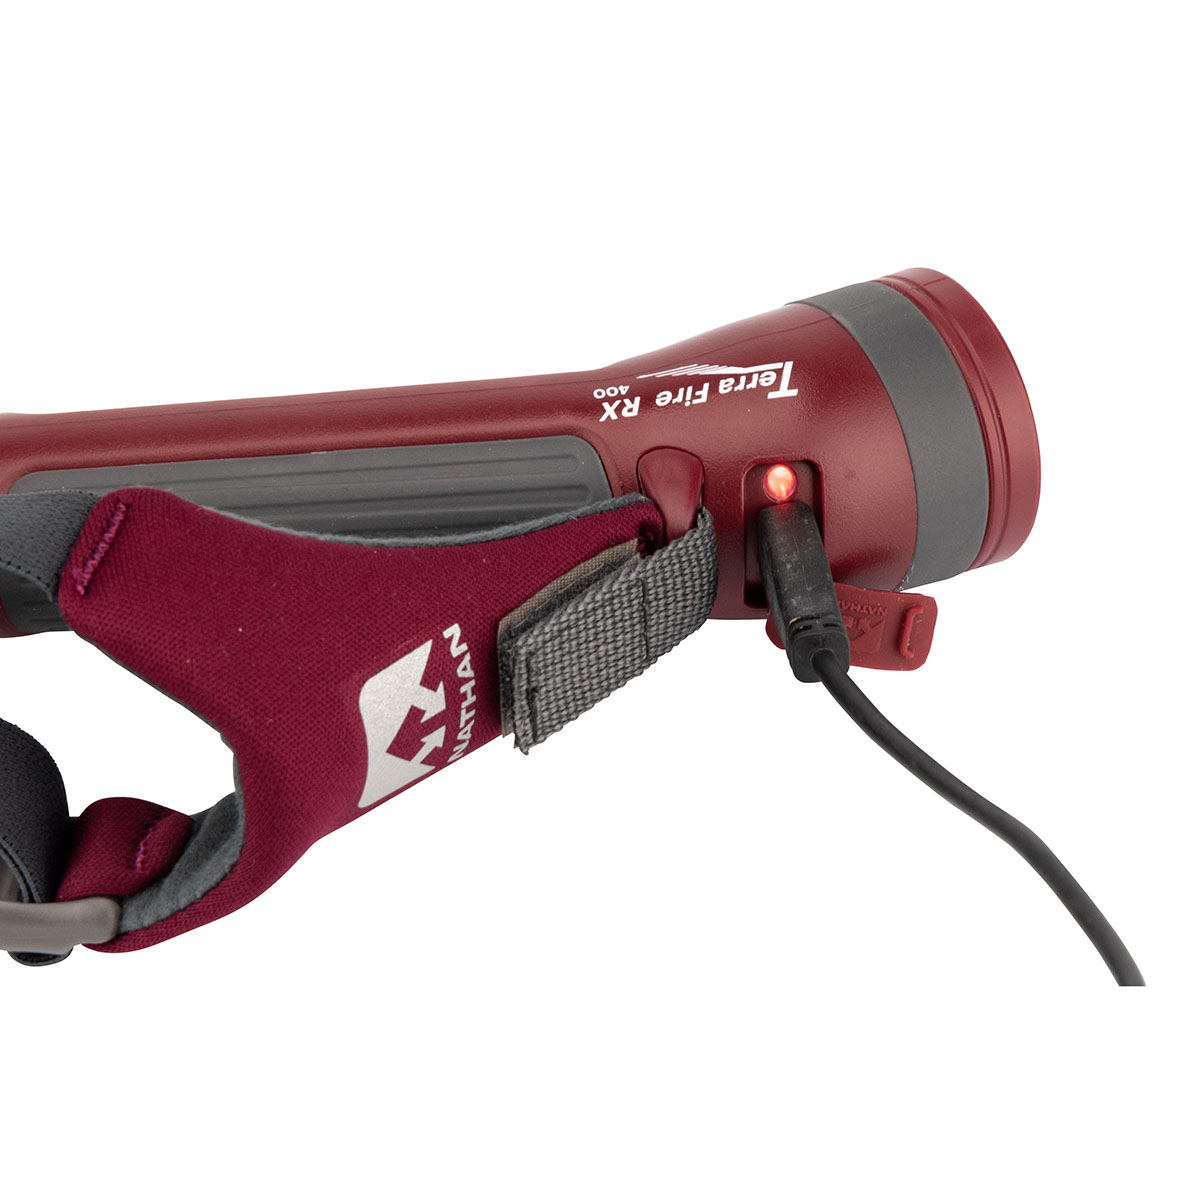 Nathan Terra Fire 400 RX Hand Torch, , large image number null